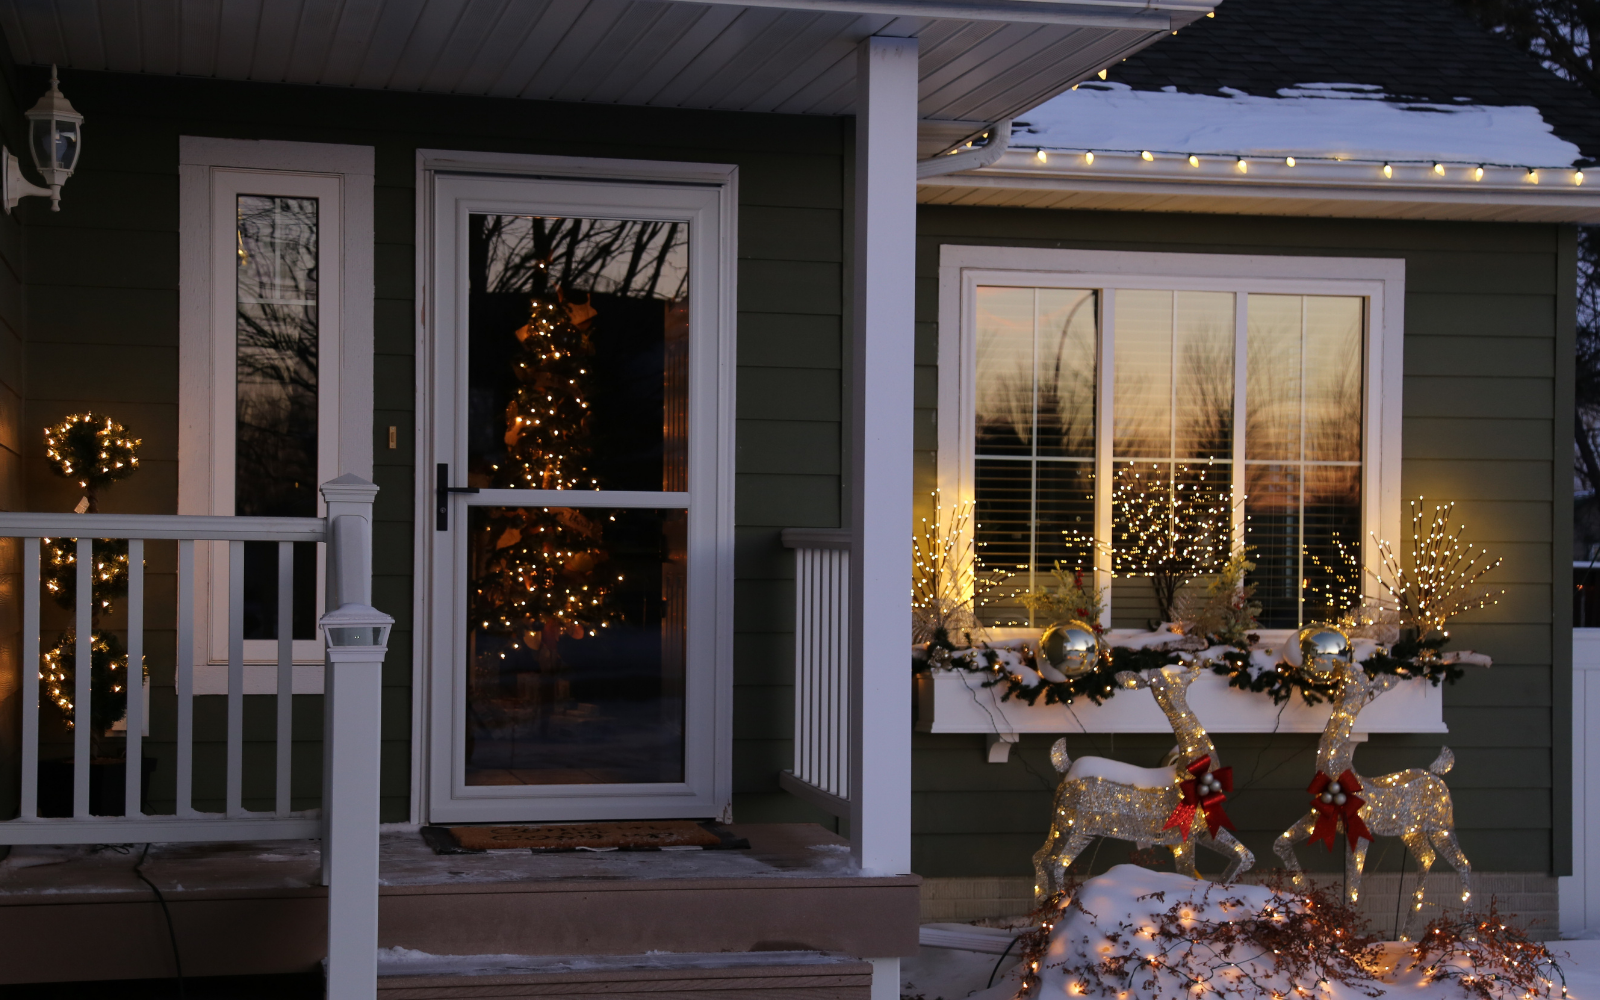 Decorating Your Entrance for the Holidays